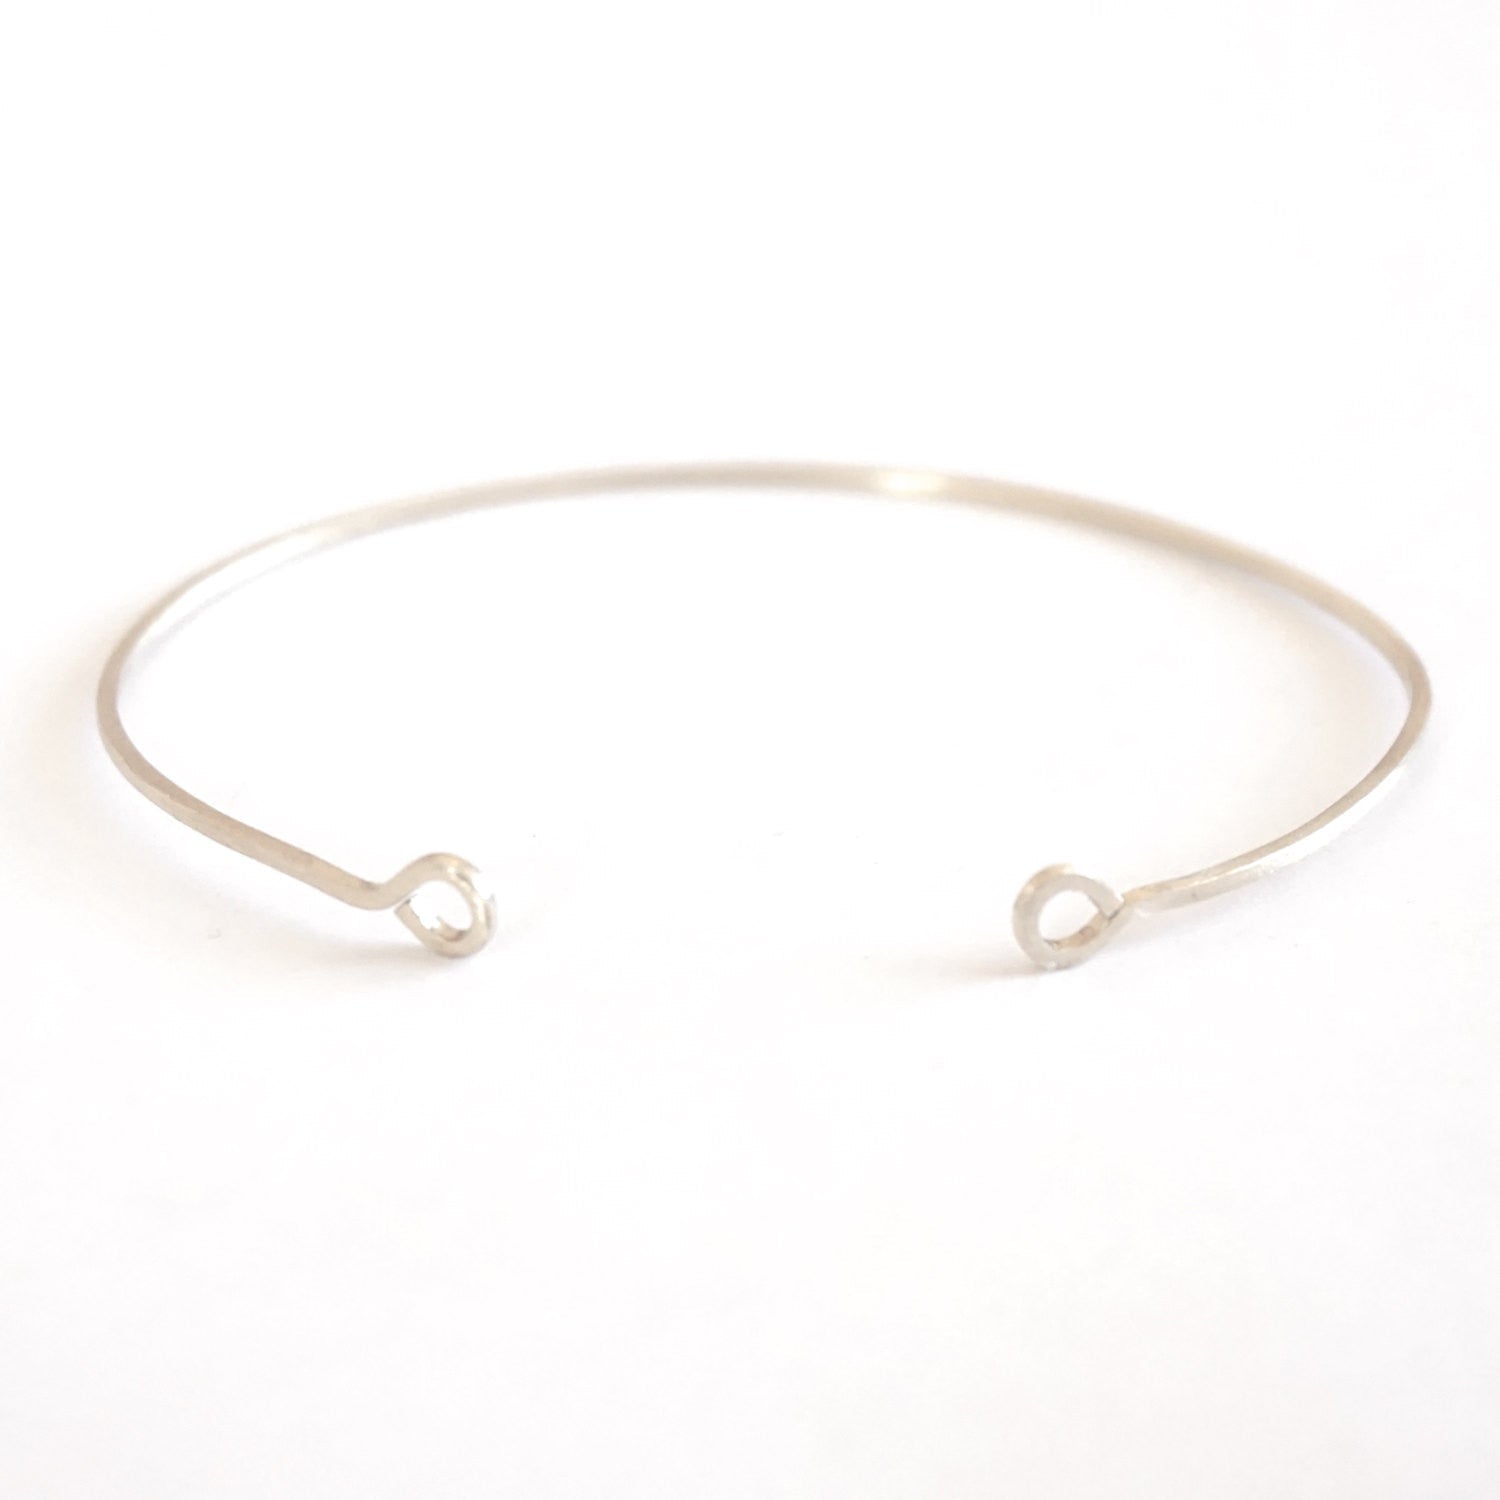 1.5 mm Square Cuff Bracelet with Circle Ends 005 - Patination Design